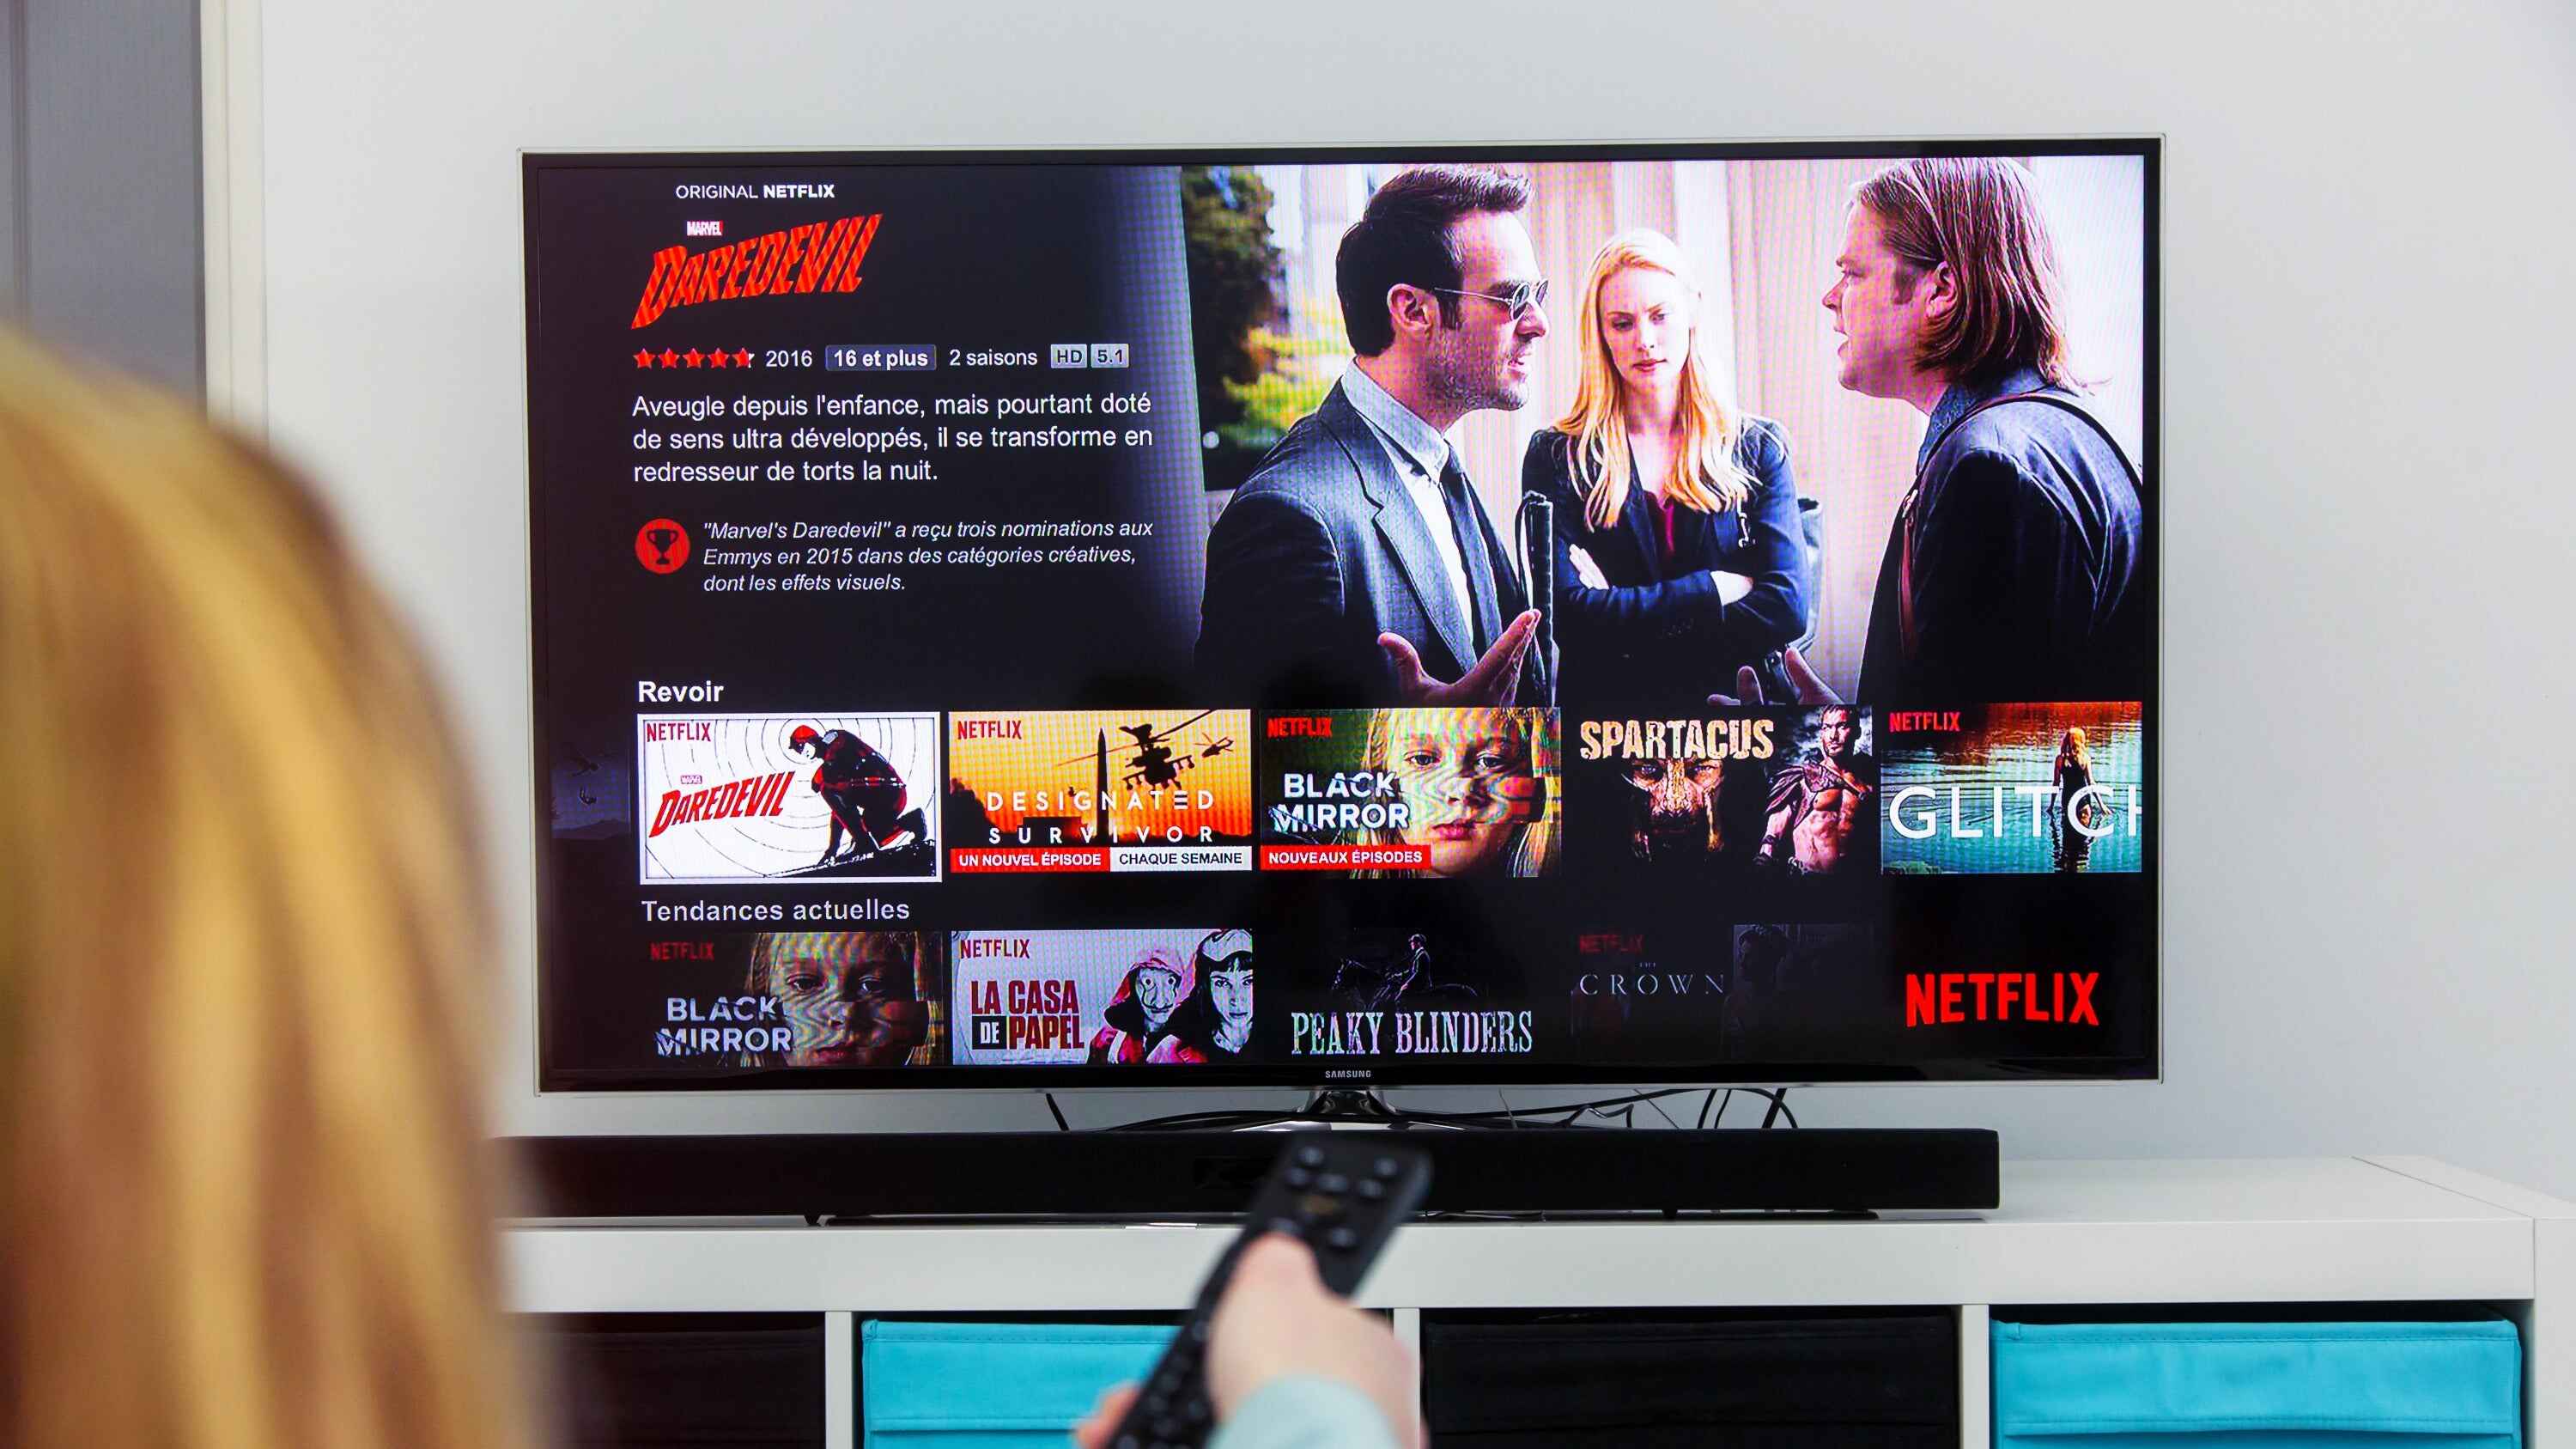 How To Use Netflix On Samsung Smart TV